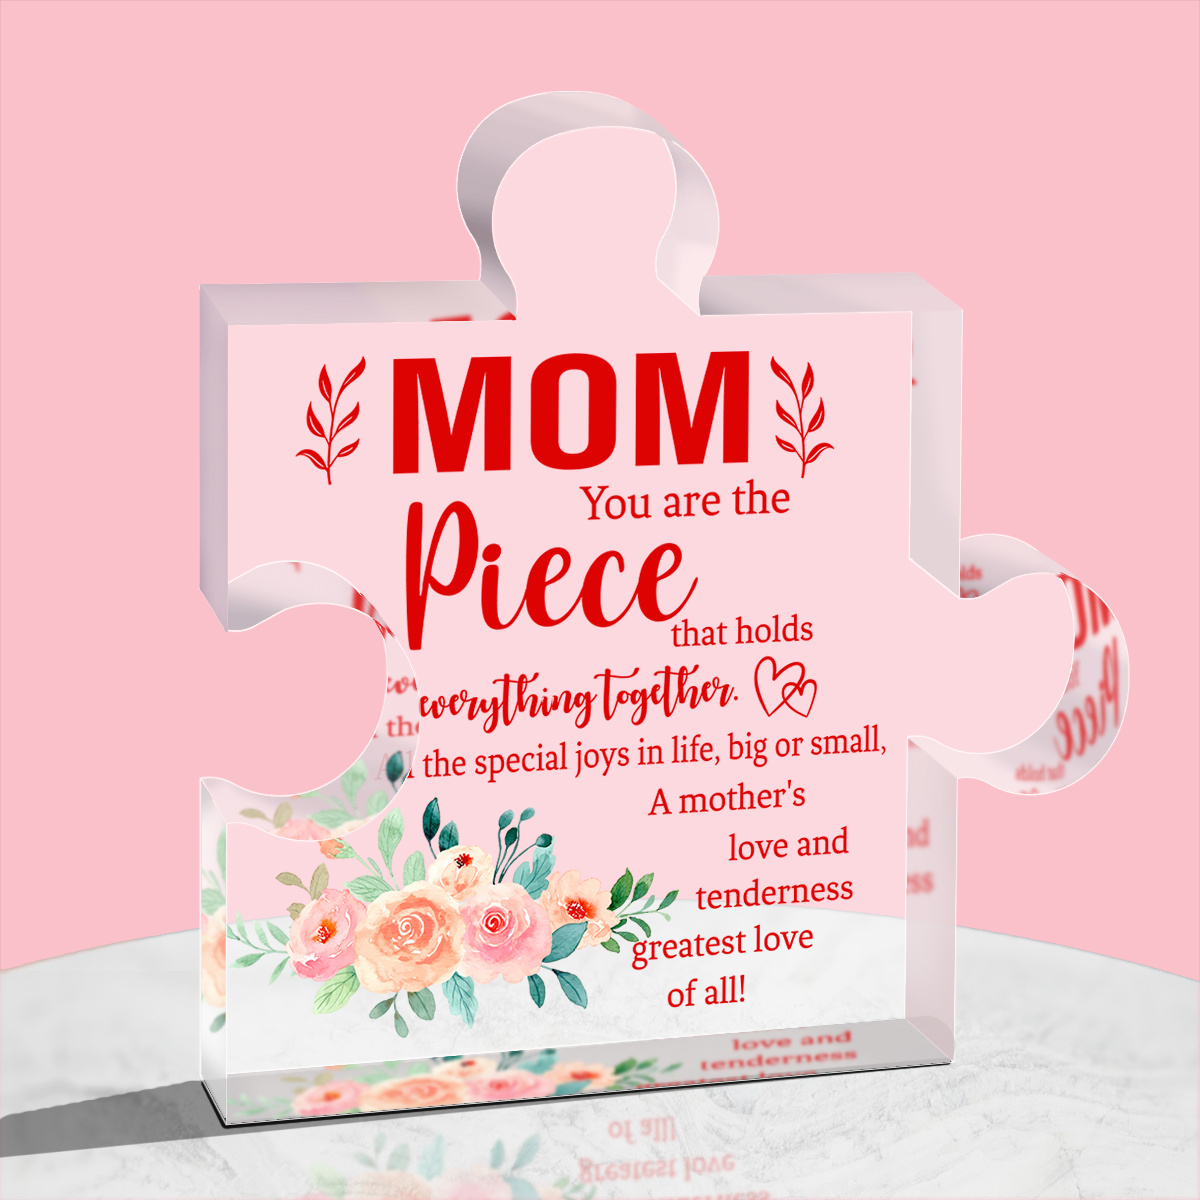 Good Gifts For Mom - Mother Day Gifts, Mom Birthday Gifts, Useful Gift